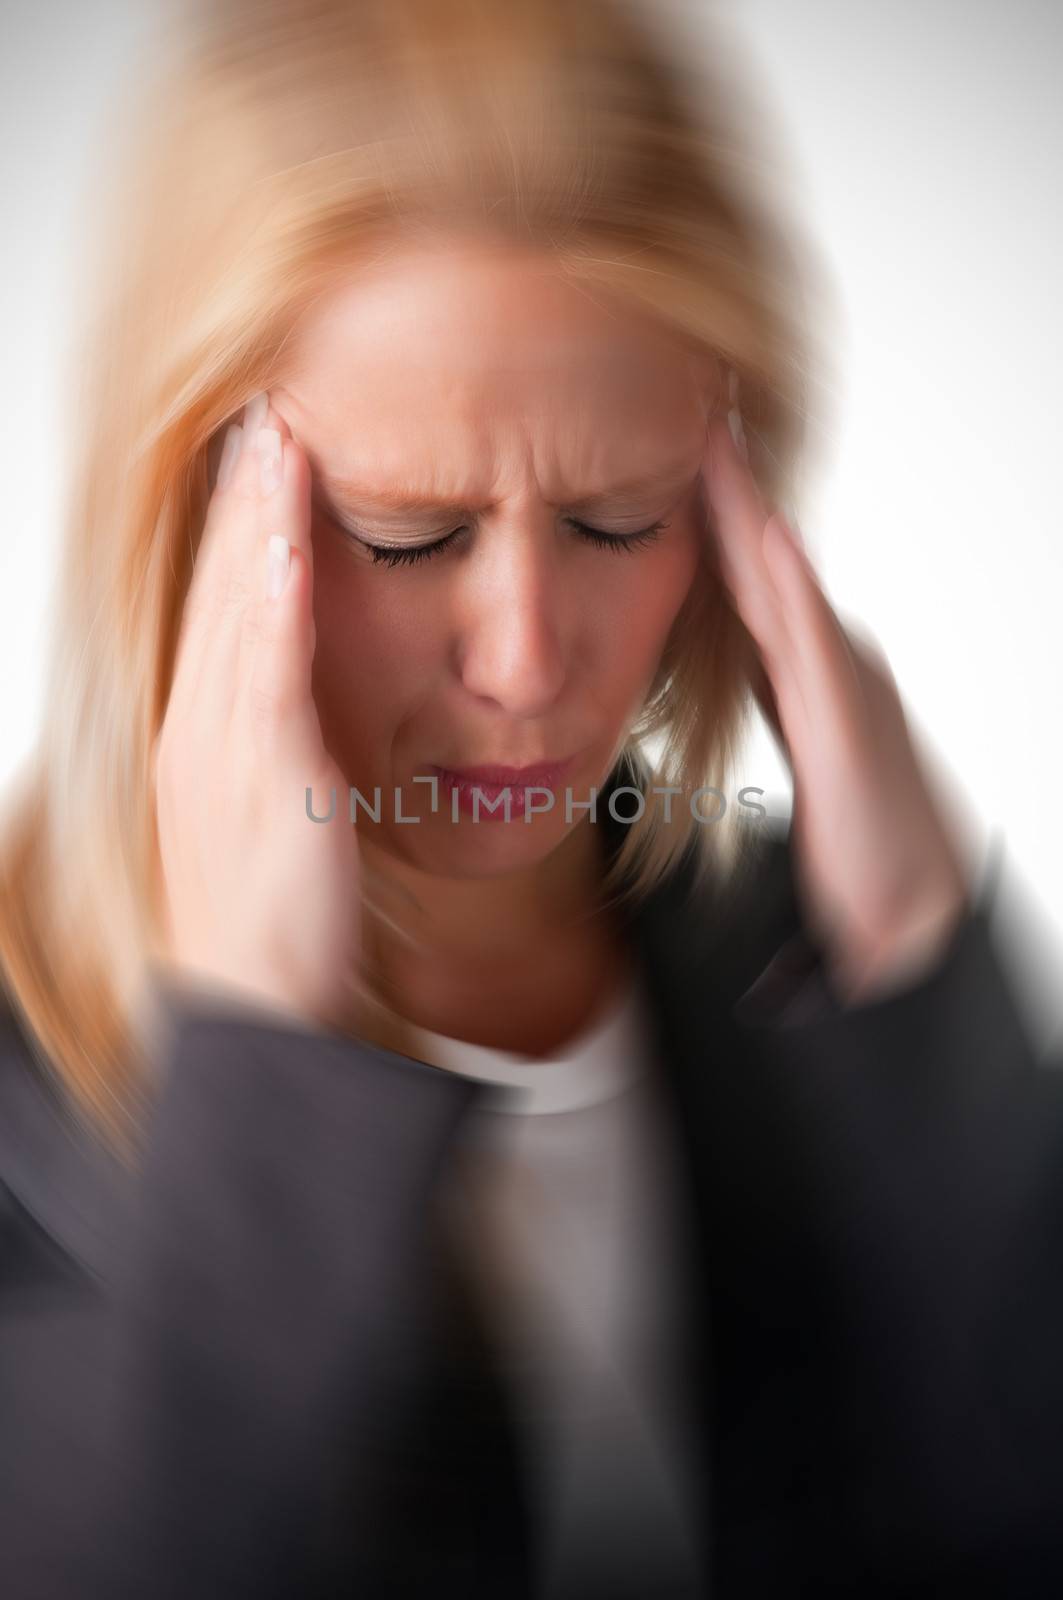 Business woman suffering from an headache, holding her hands to the head, with radial blur effect applied